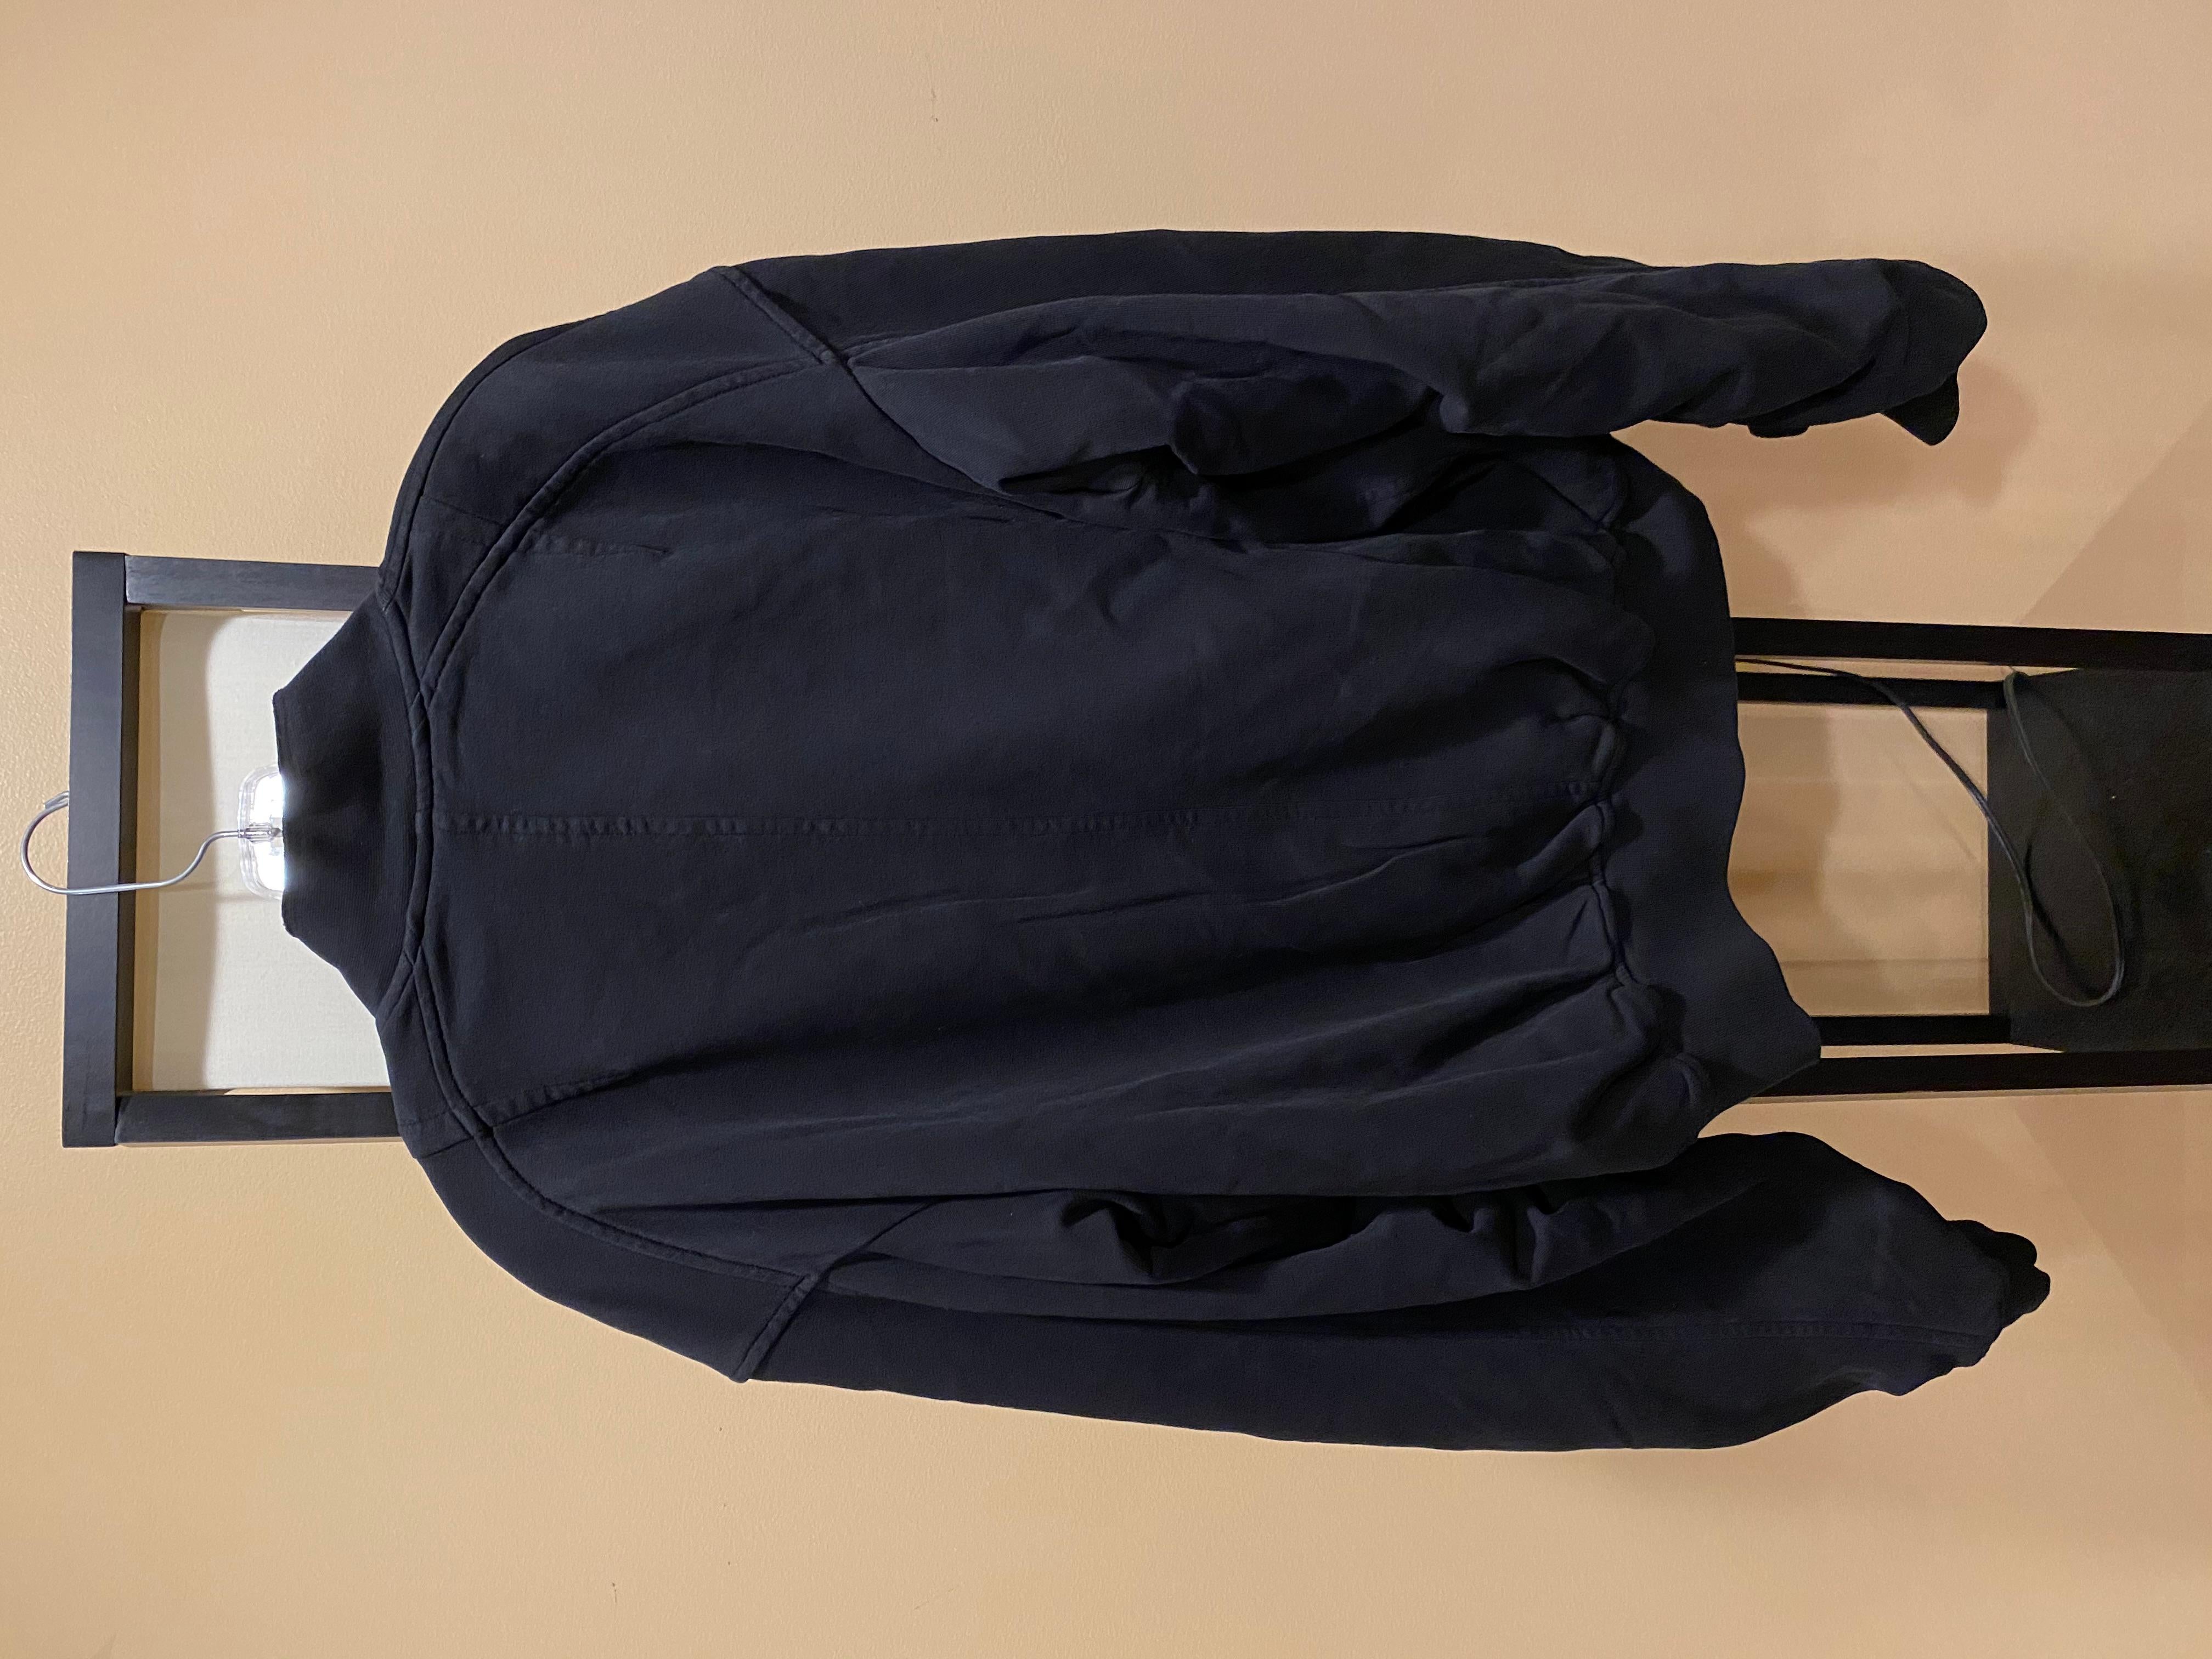 Gently used (worn x1) w/ tags
Haider Ackermann Perth Black Reversible Bomber
Size M (can fit up to an XL; see measurements)
This is the FW14 reissued Heat Collab version
As seen on Kanye West, a true grailed piece
Please reframe from any lowballs.